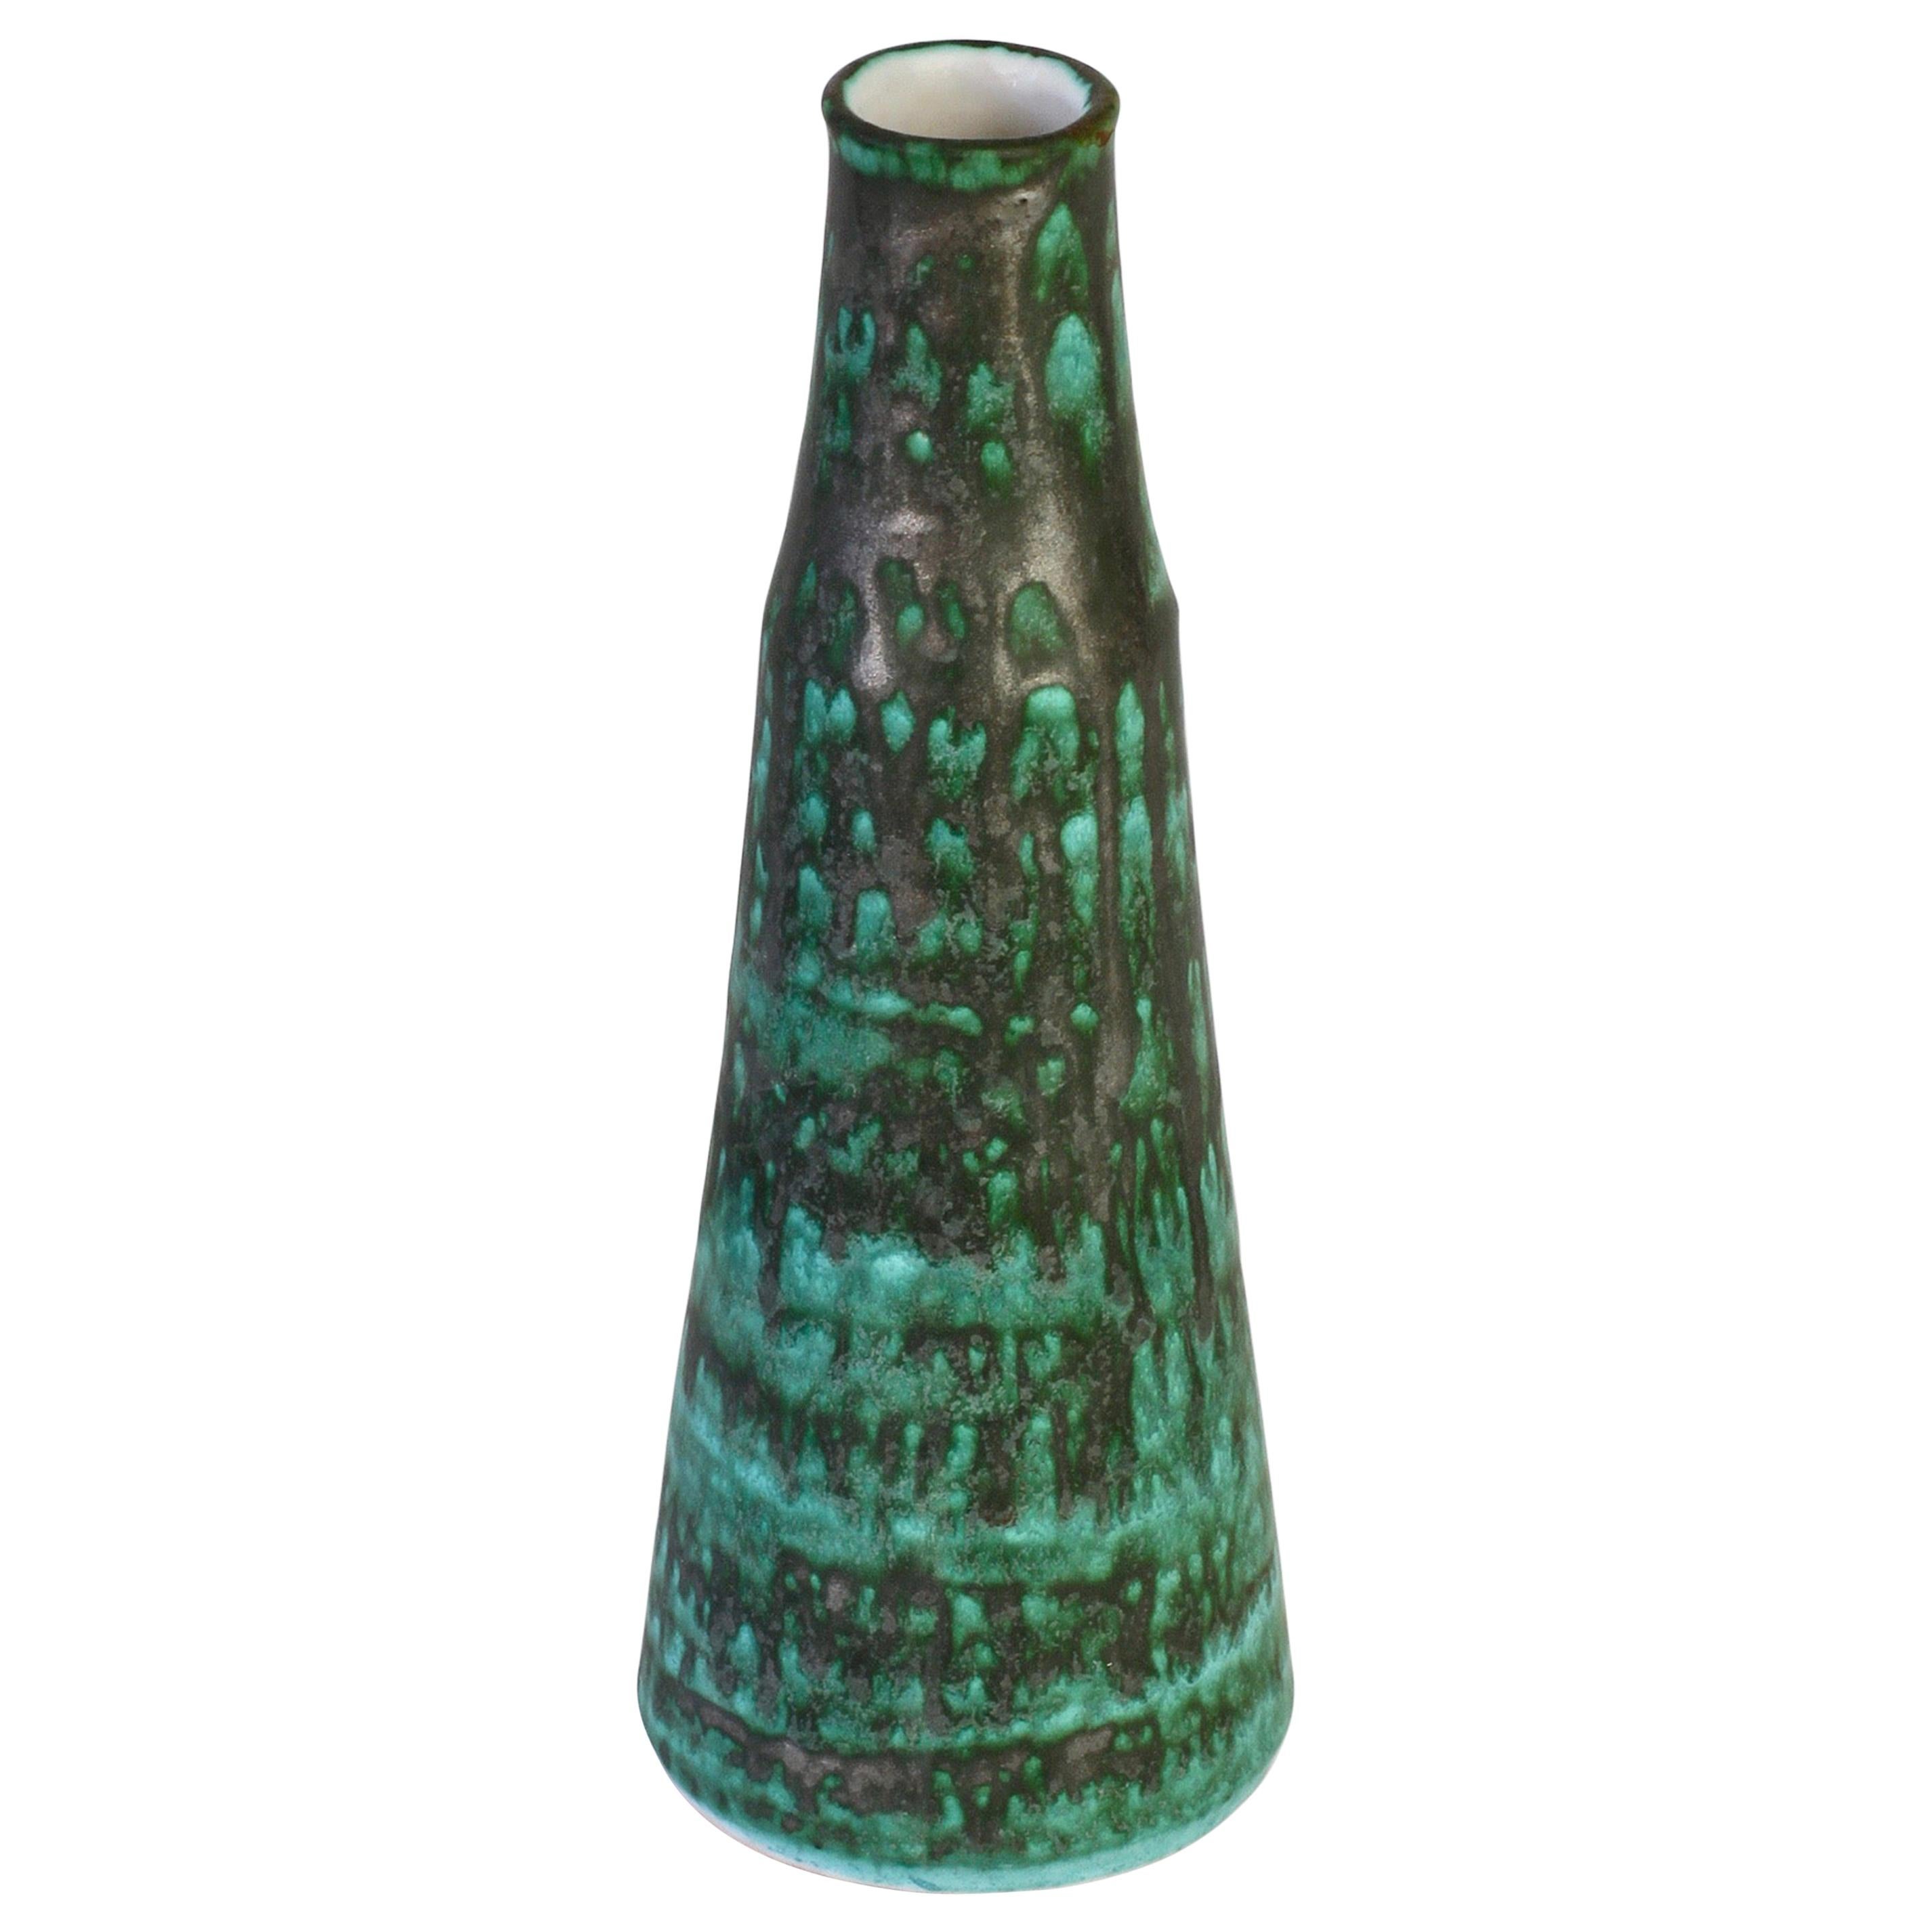 Vintage Midcentury Green and Graphite Glazed Vase by Waechtersbach, 1950s For Sale